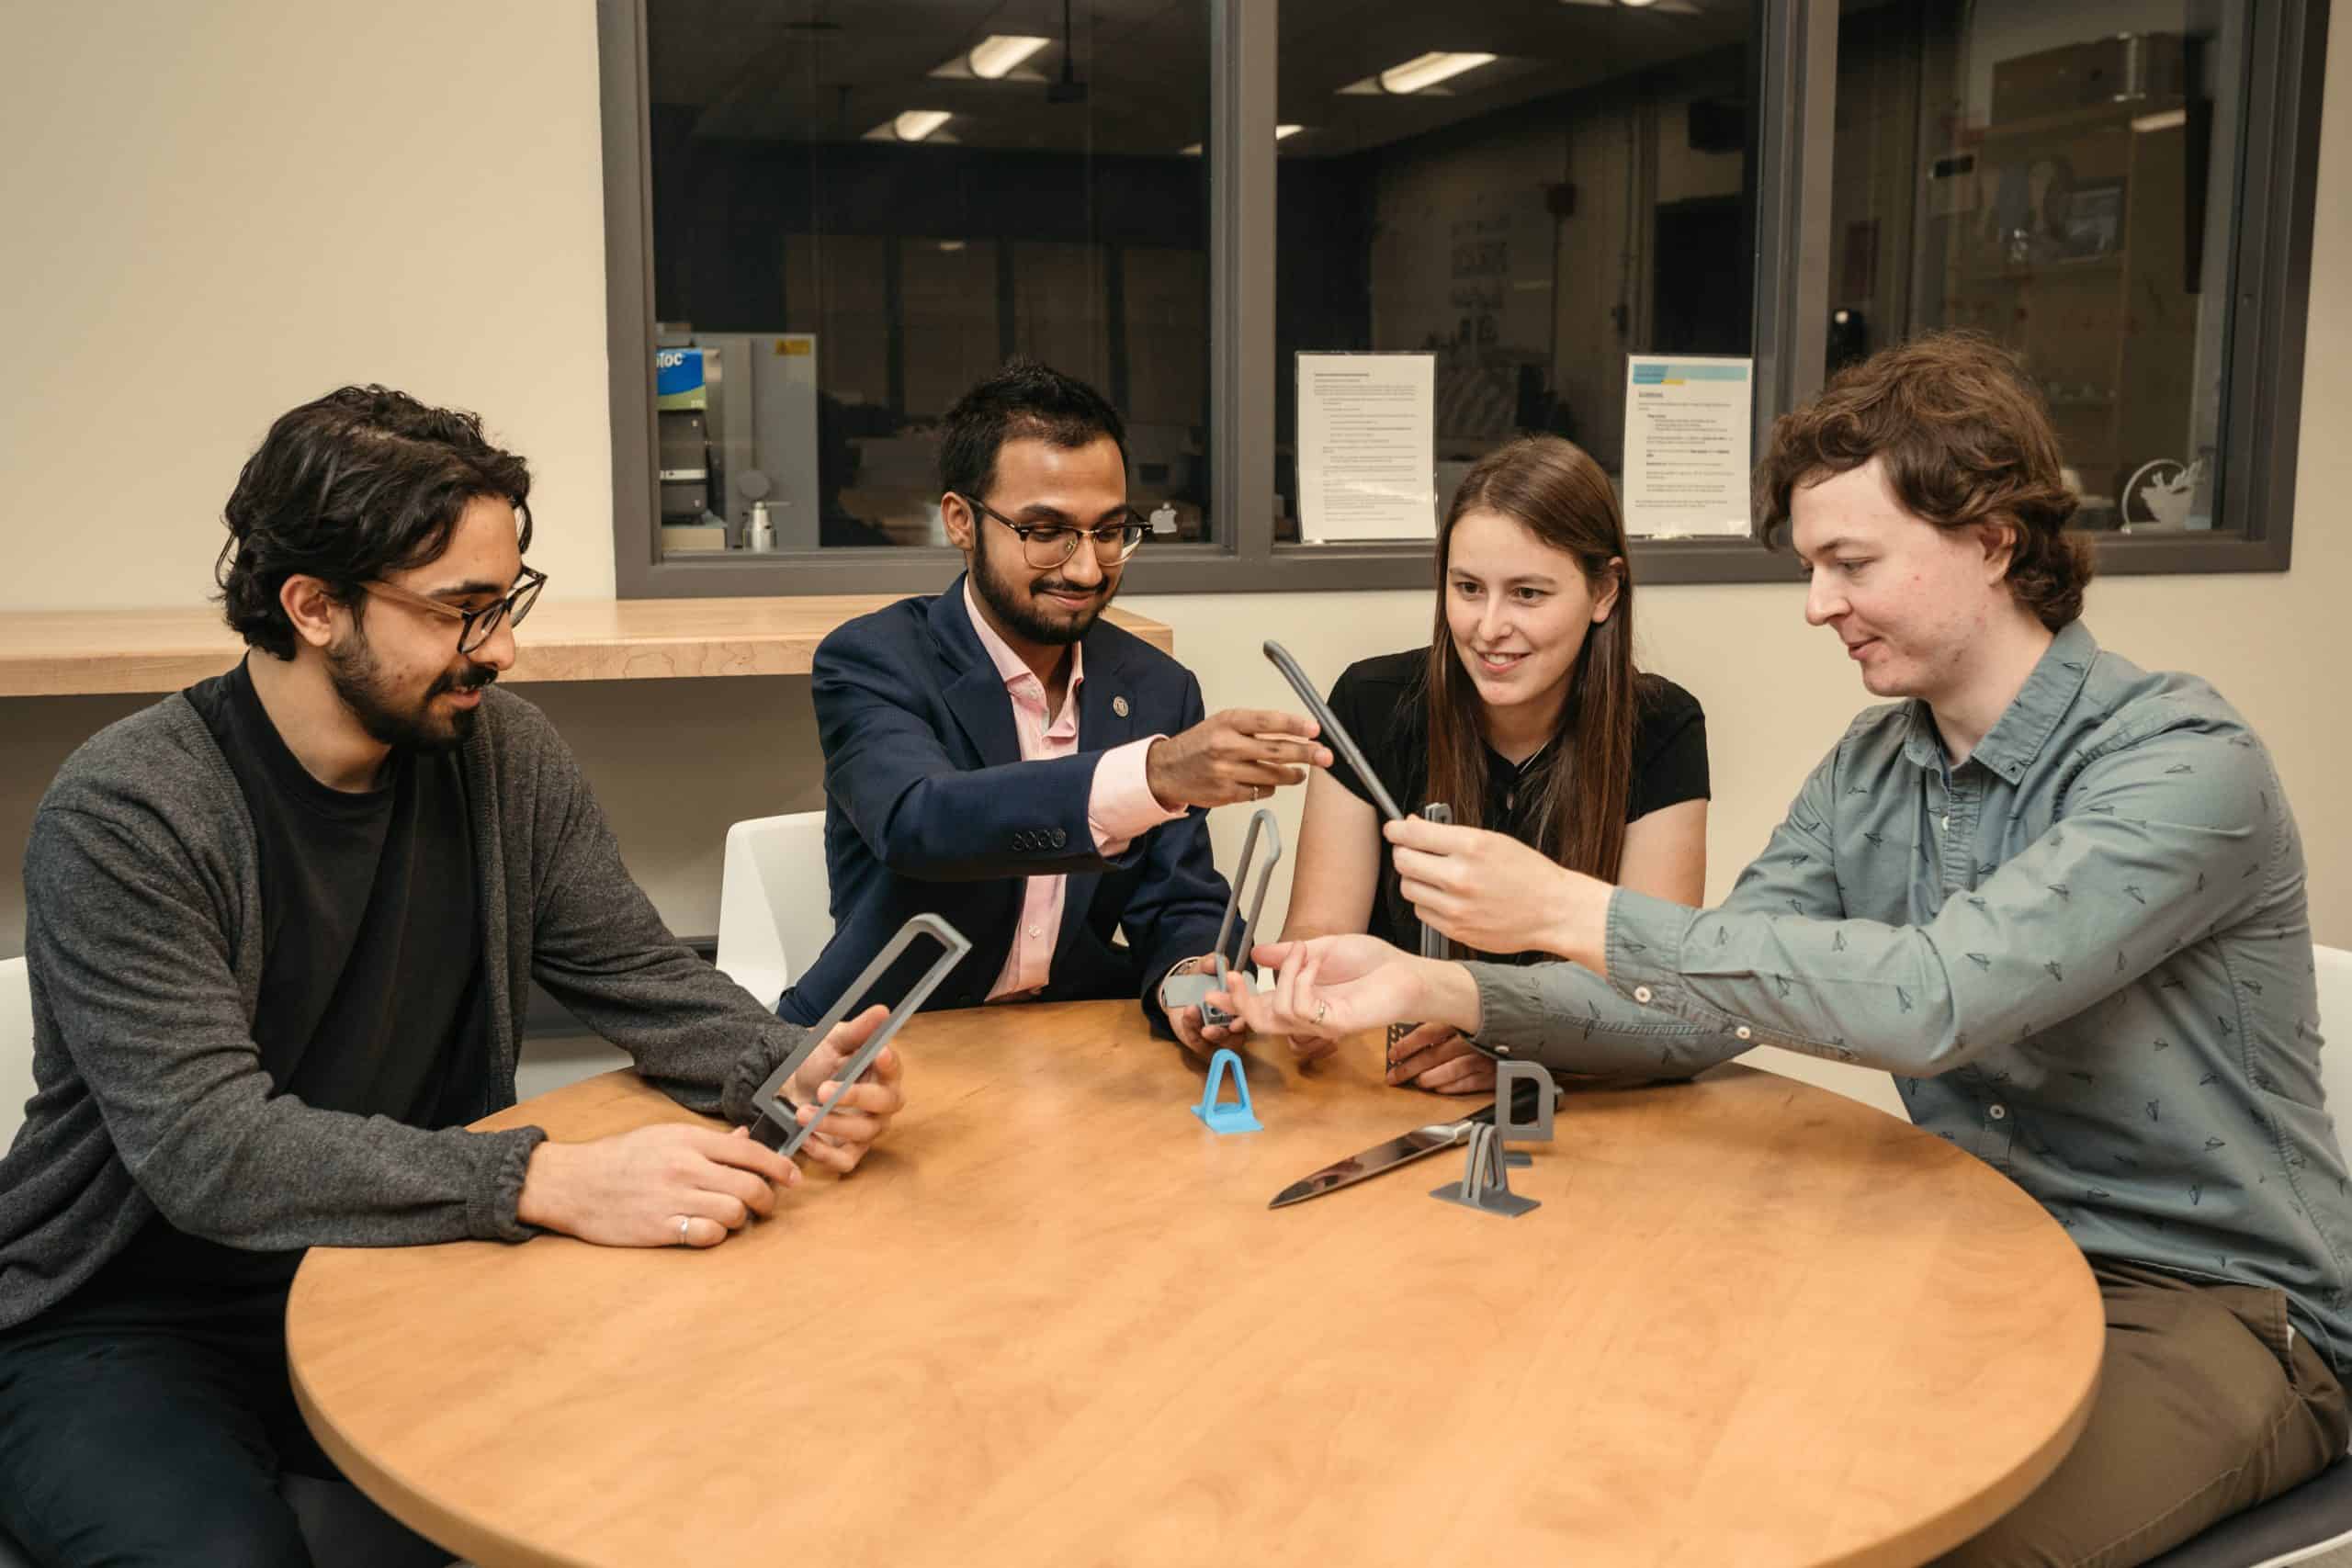 Hamilton grads win award for device that helps Parkinson’s patients use knives safely